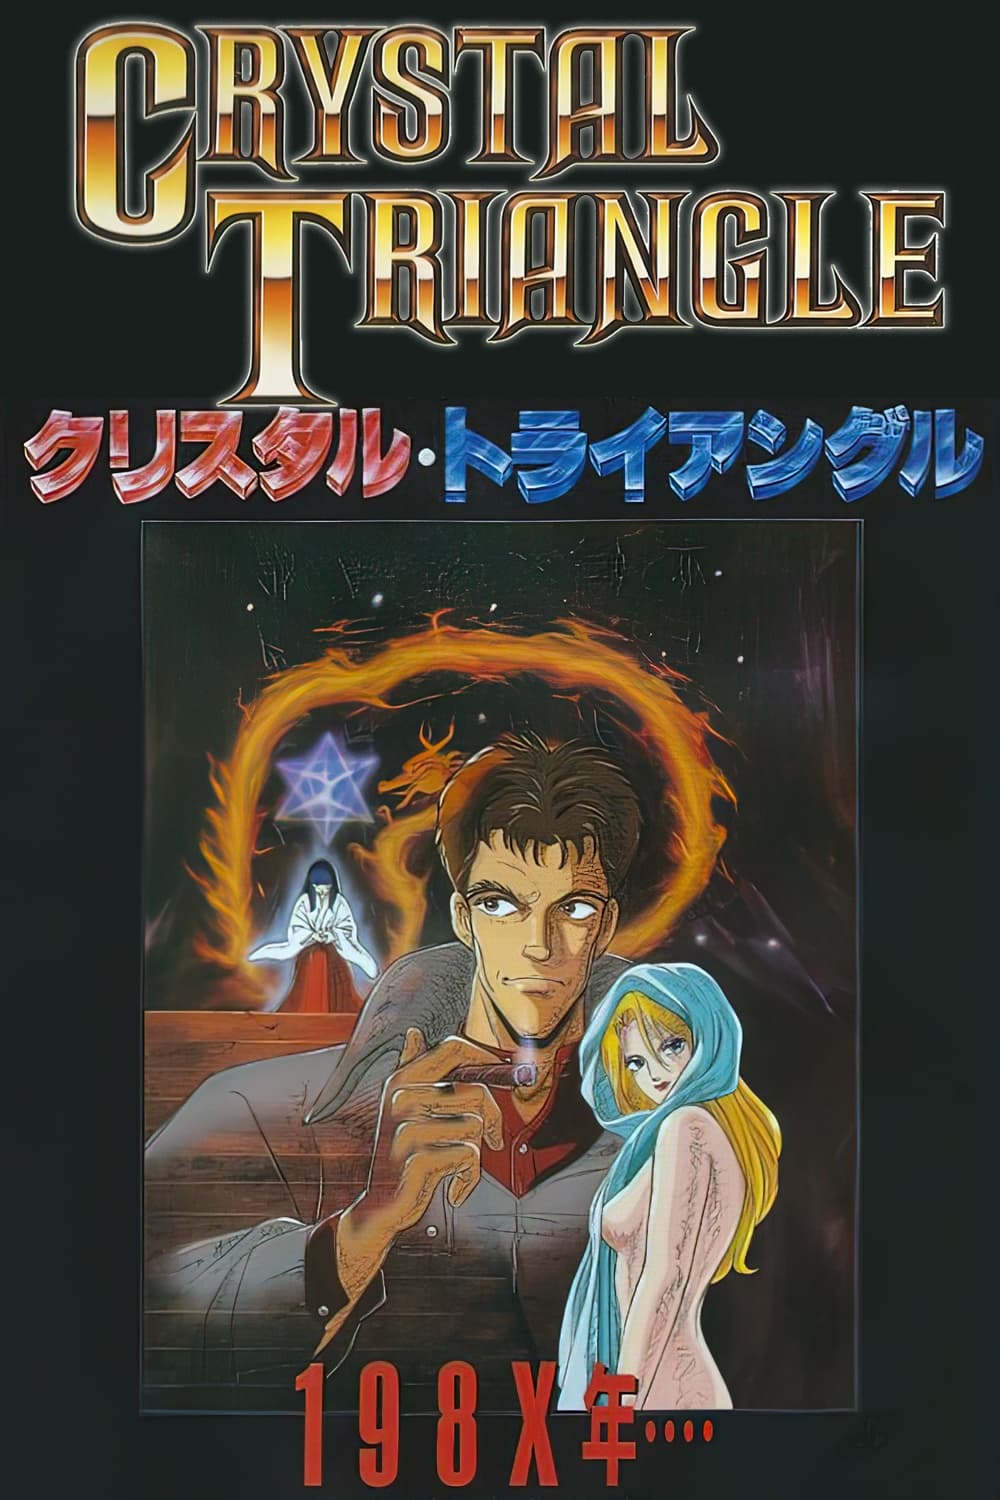 Crystal Triangle: The Forbidden Revelation (1987)